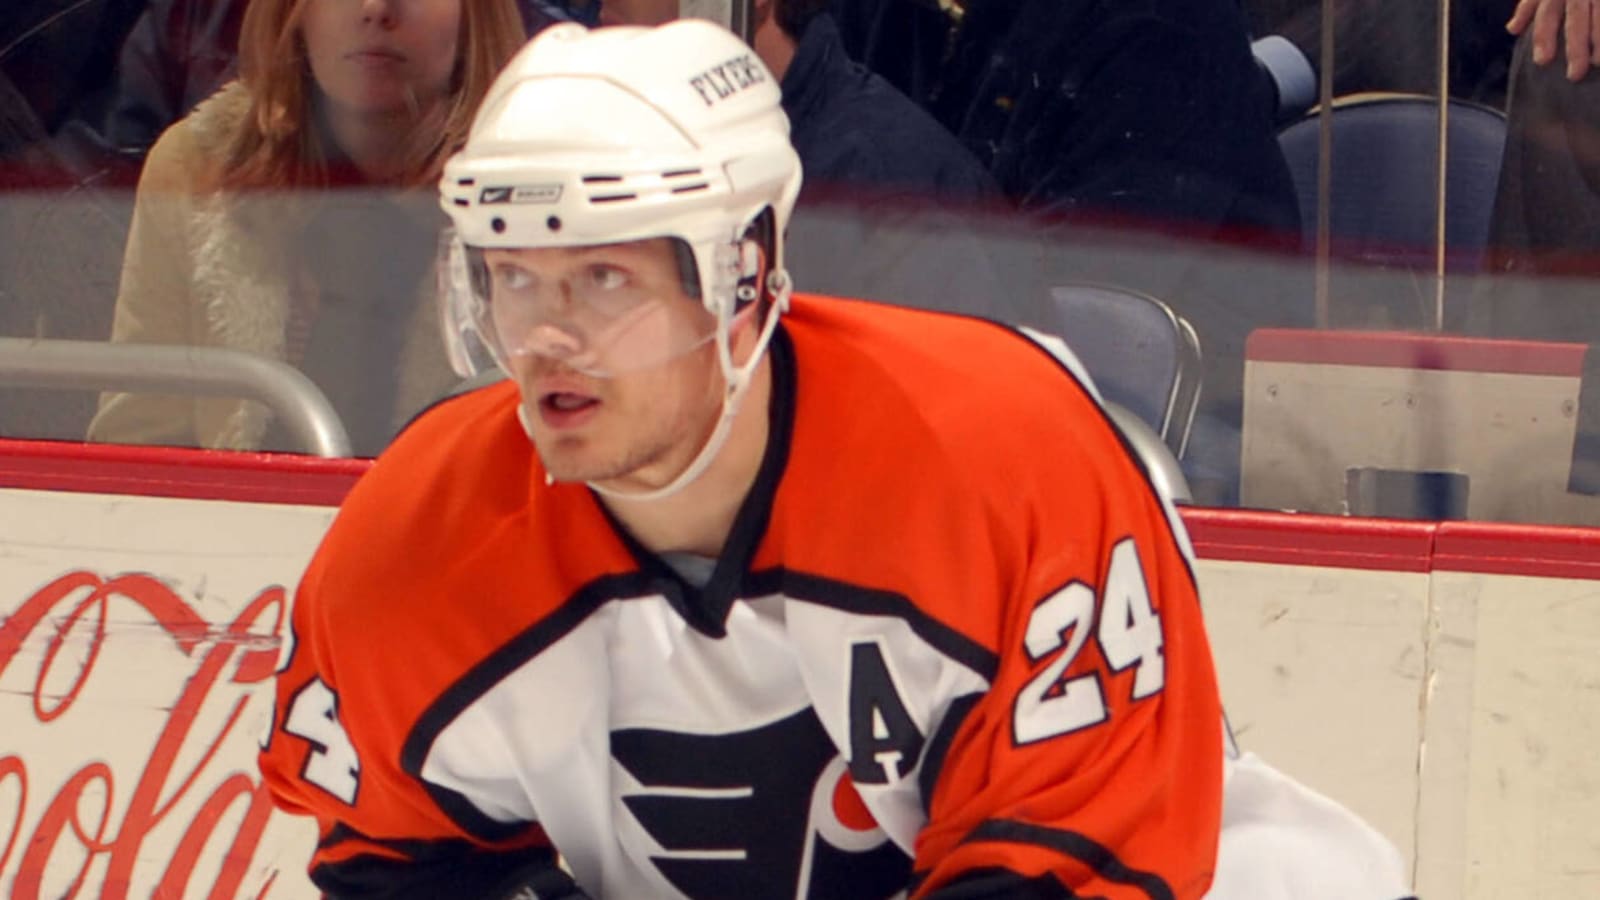 Flyers hire Sami Kapanen, Kyle Shero in front office roles